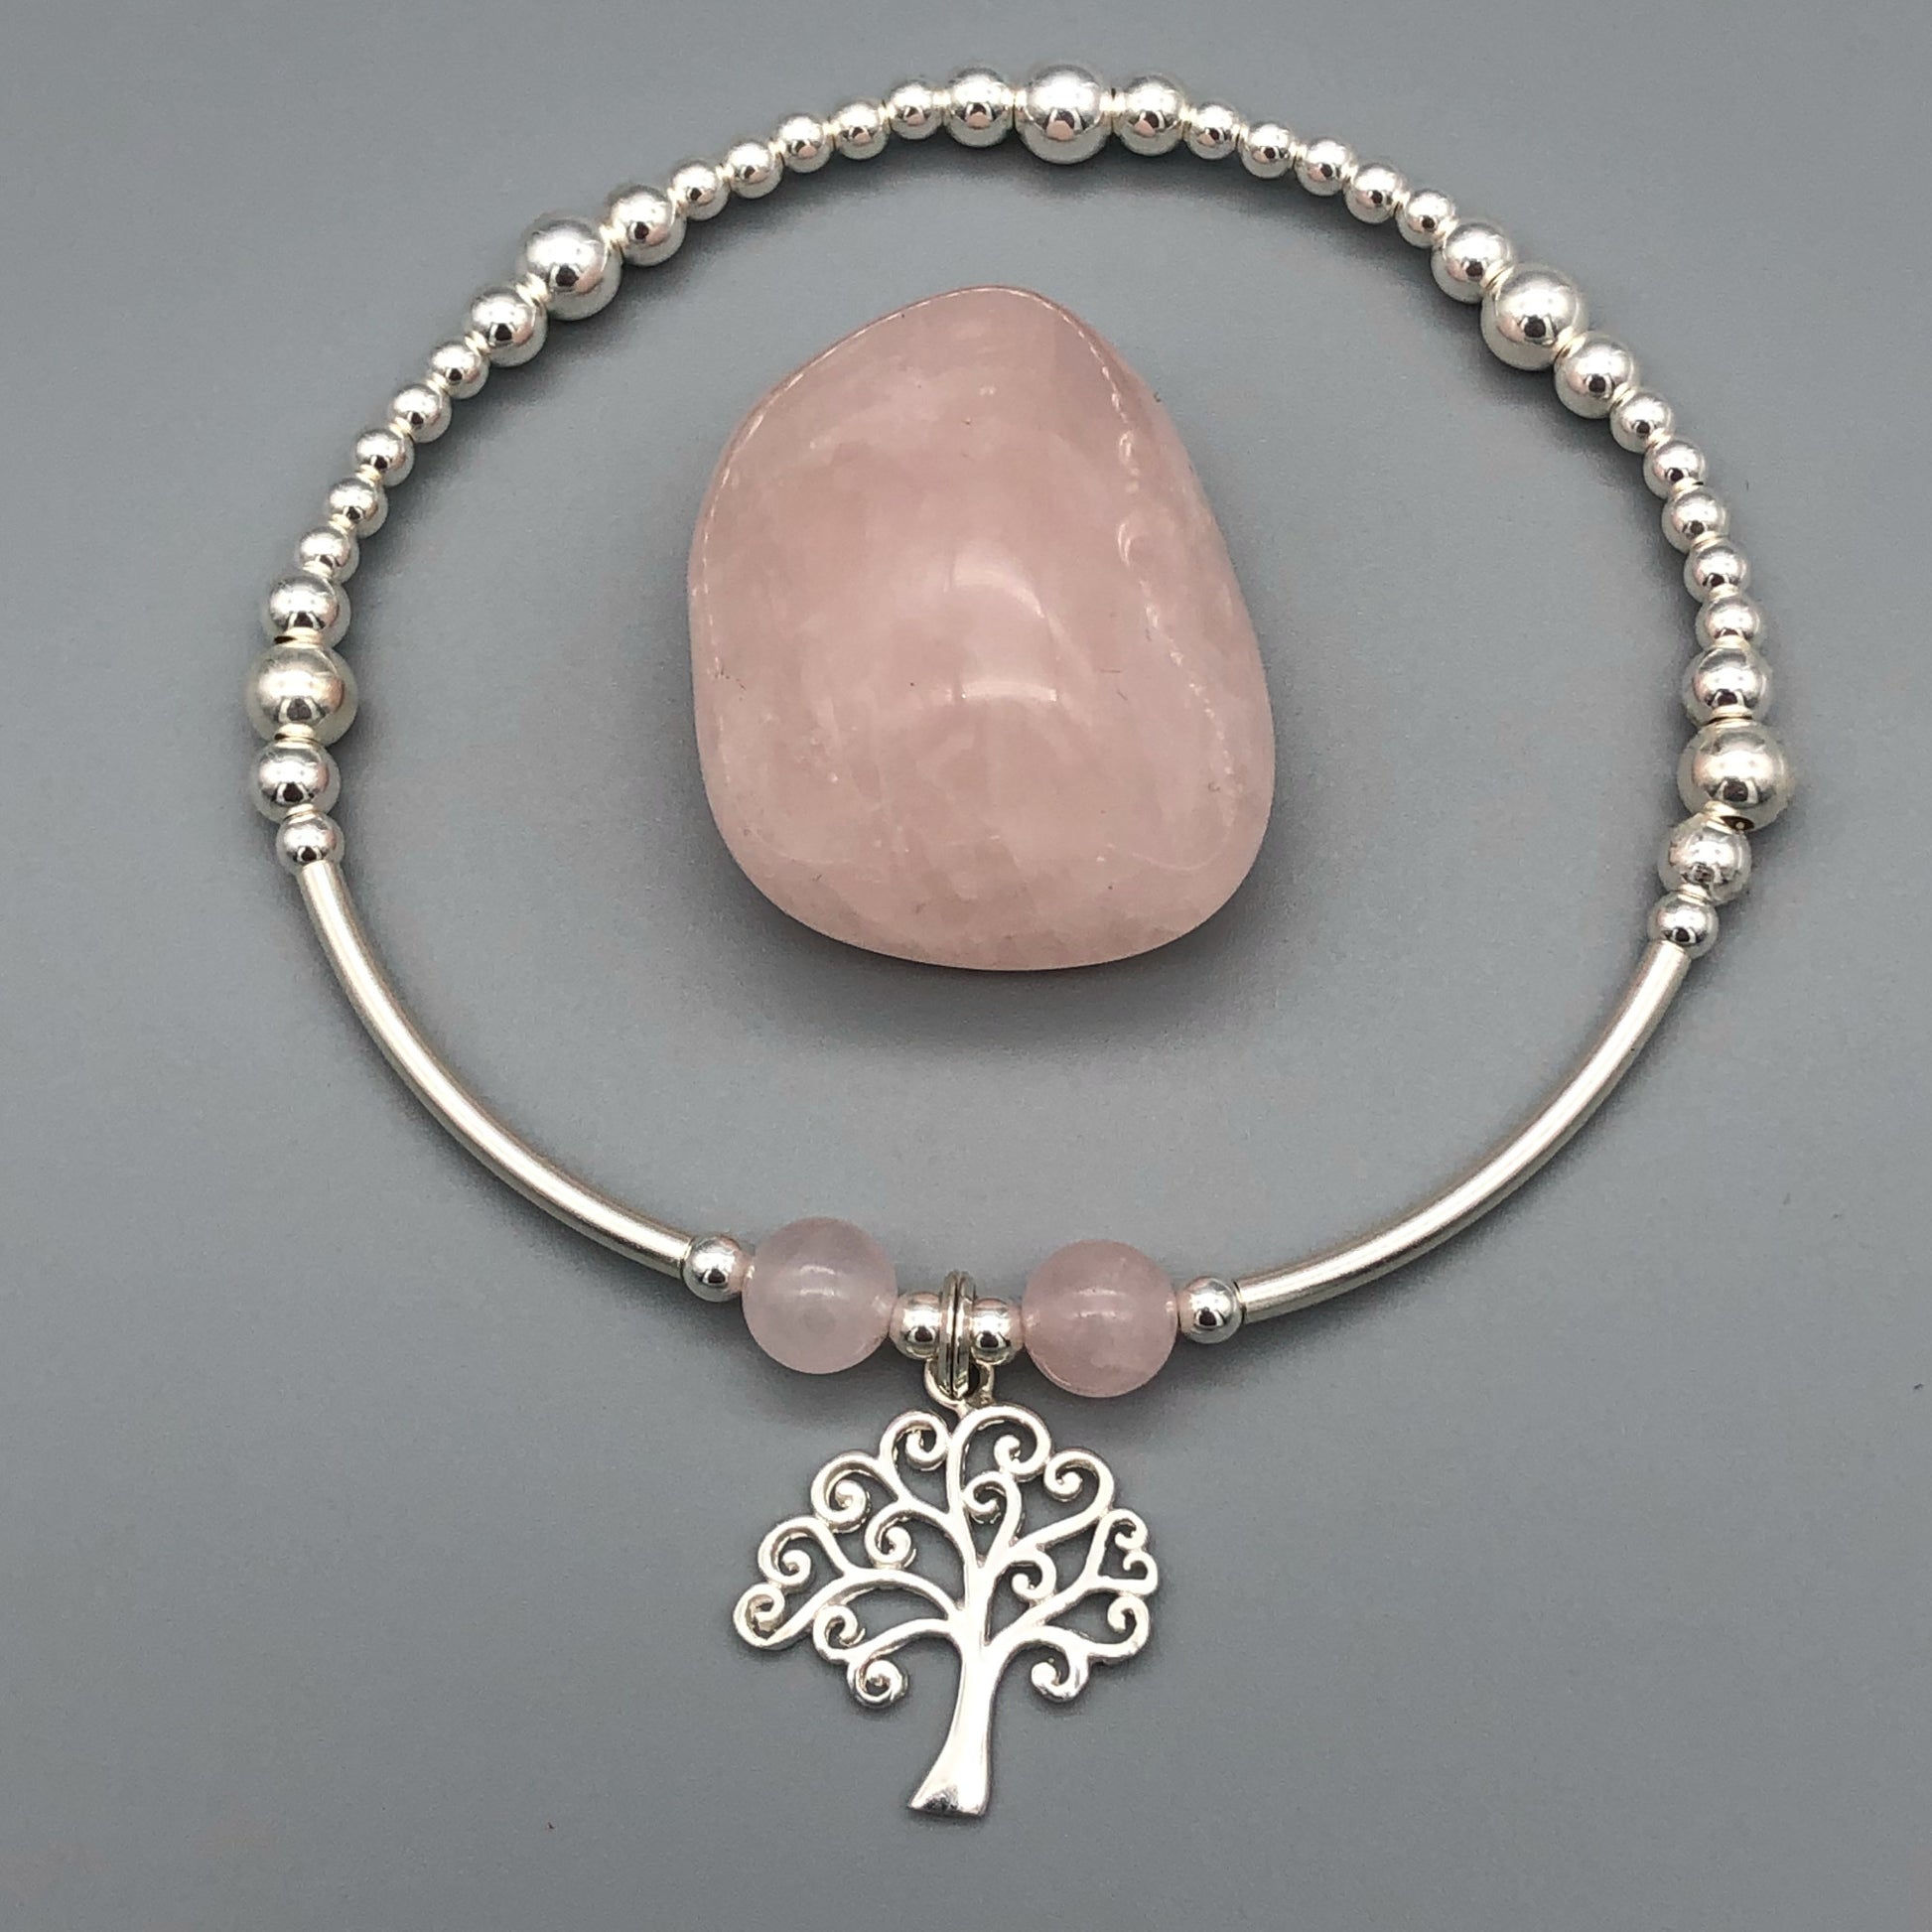 Tree of Life charm rose quartz & silver women's stacking charm bracelet by My Silver Wish